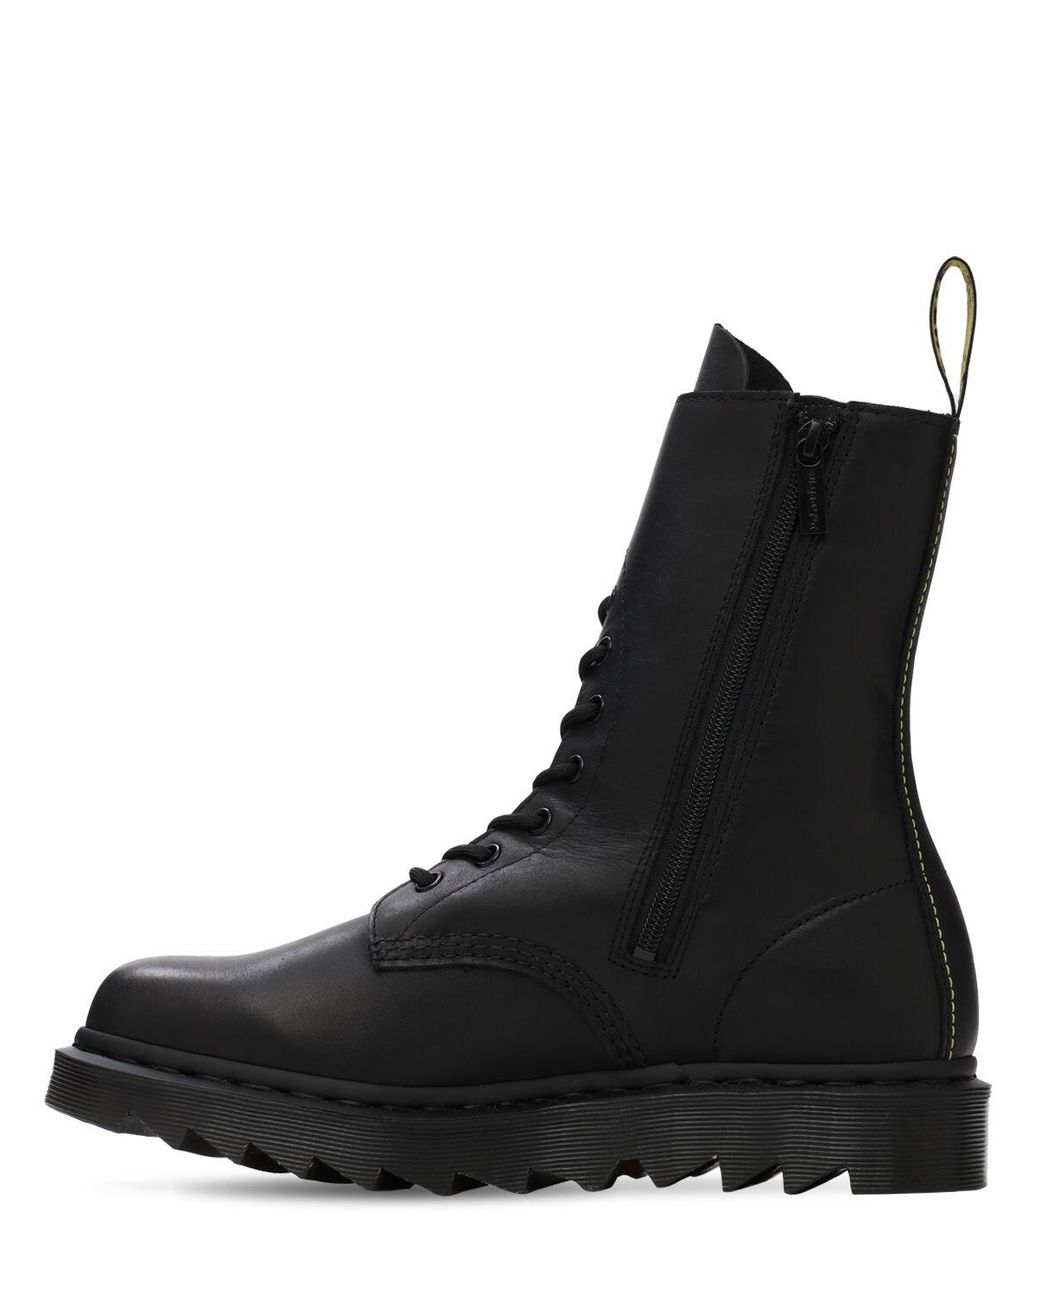 Yohji Yamamoto X Dr. Martens Temperley Twisted Boots in Black for Men | Lyst